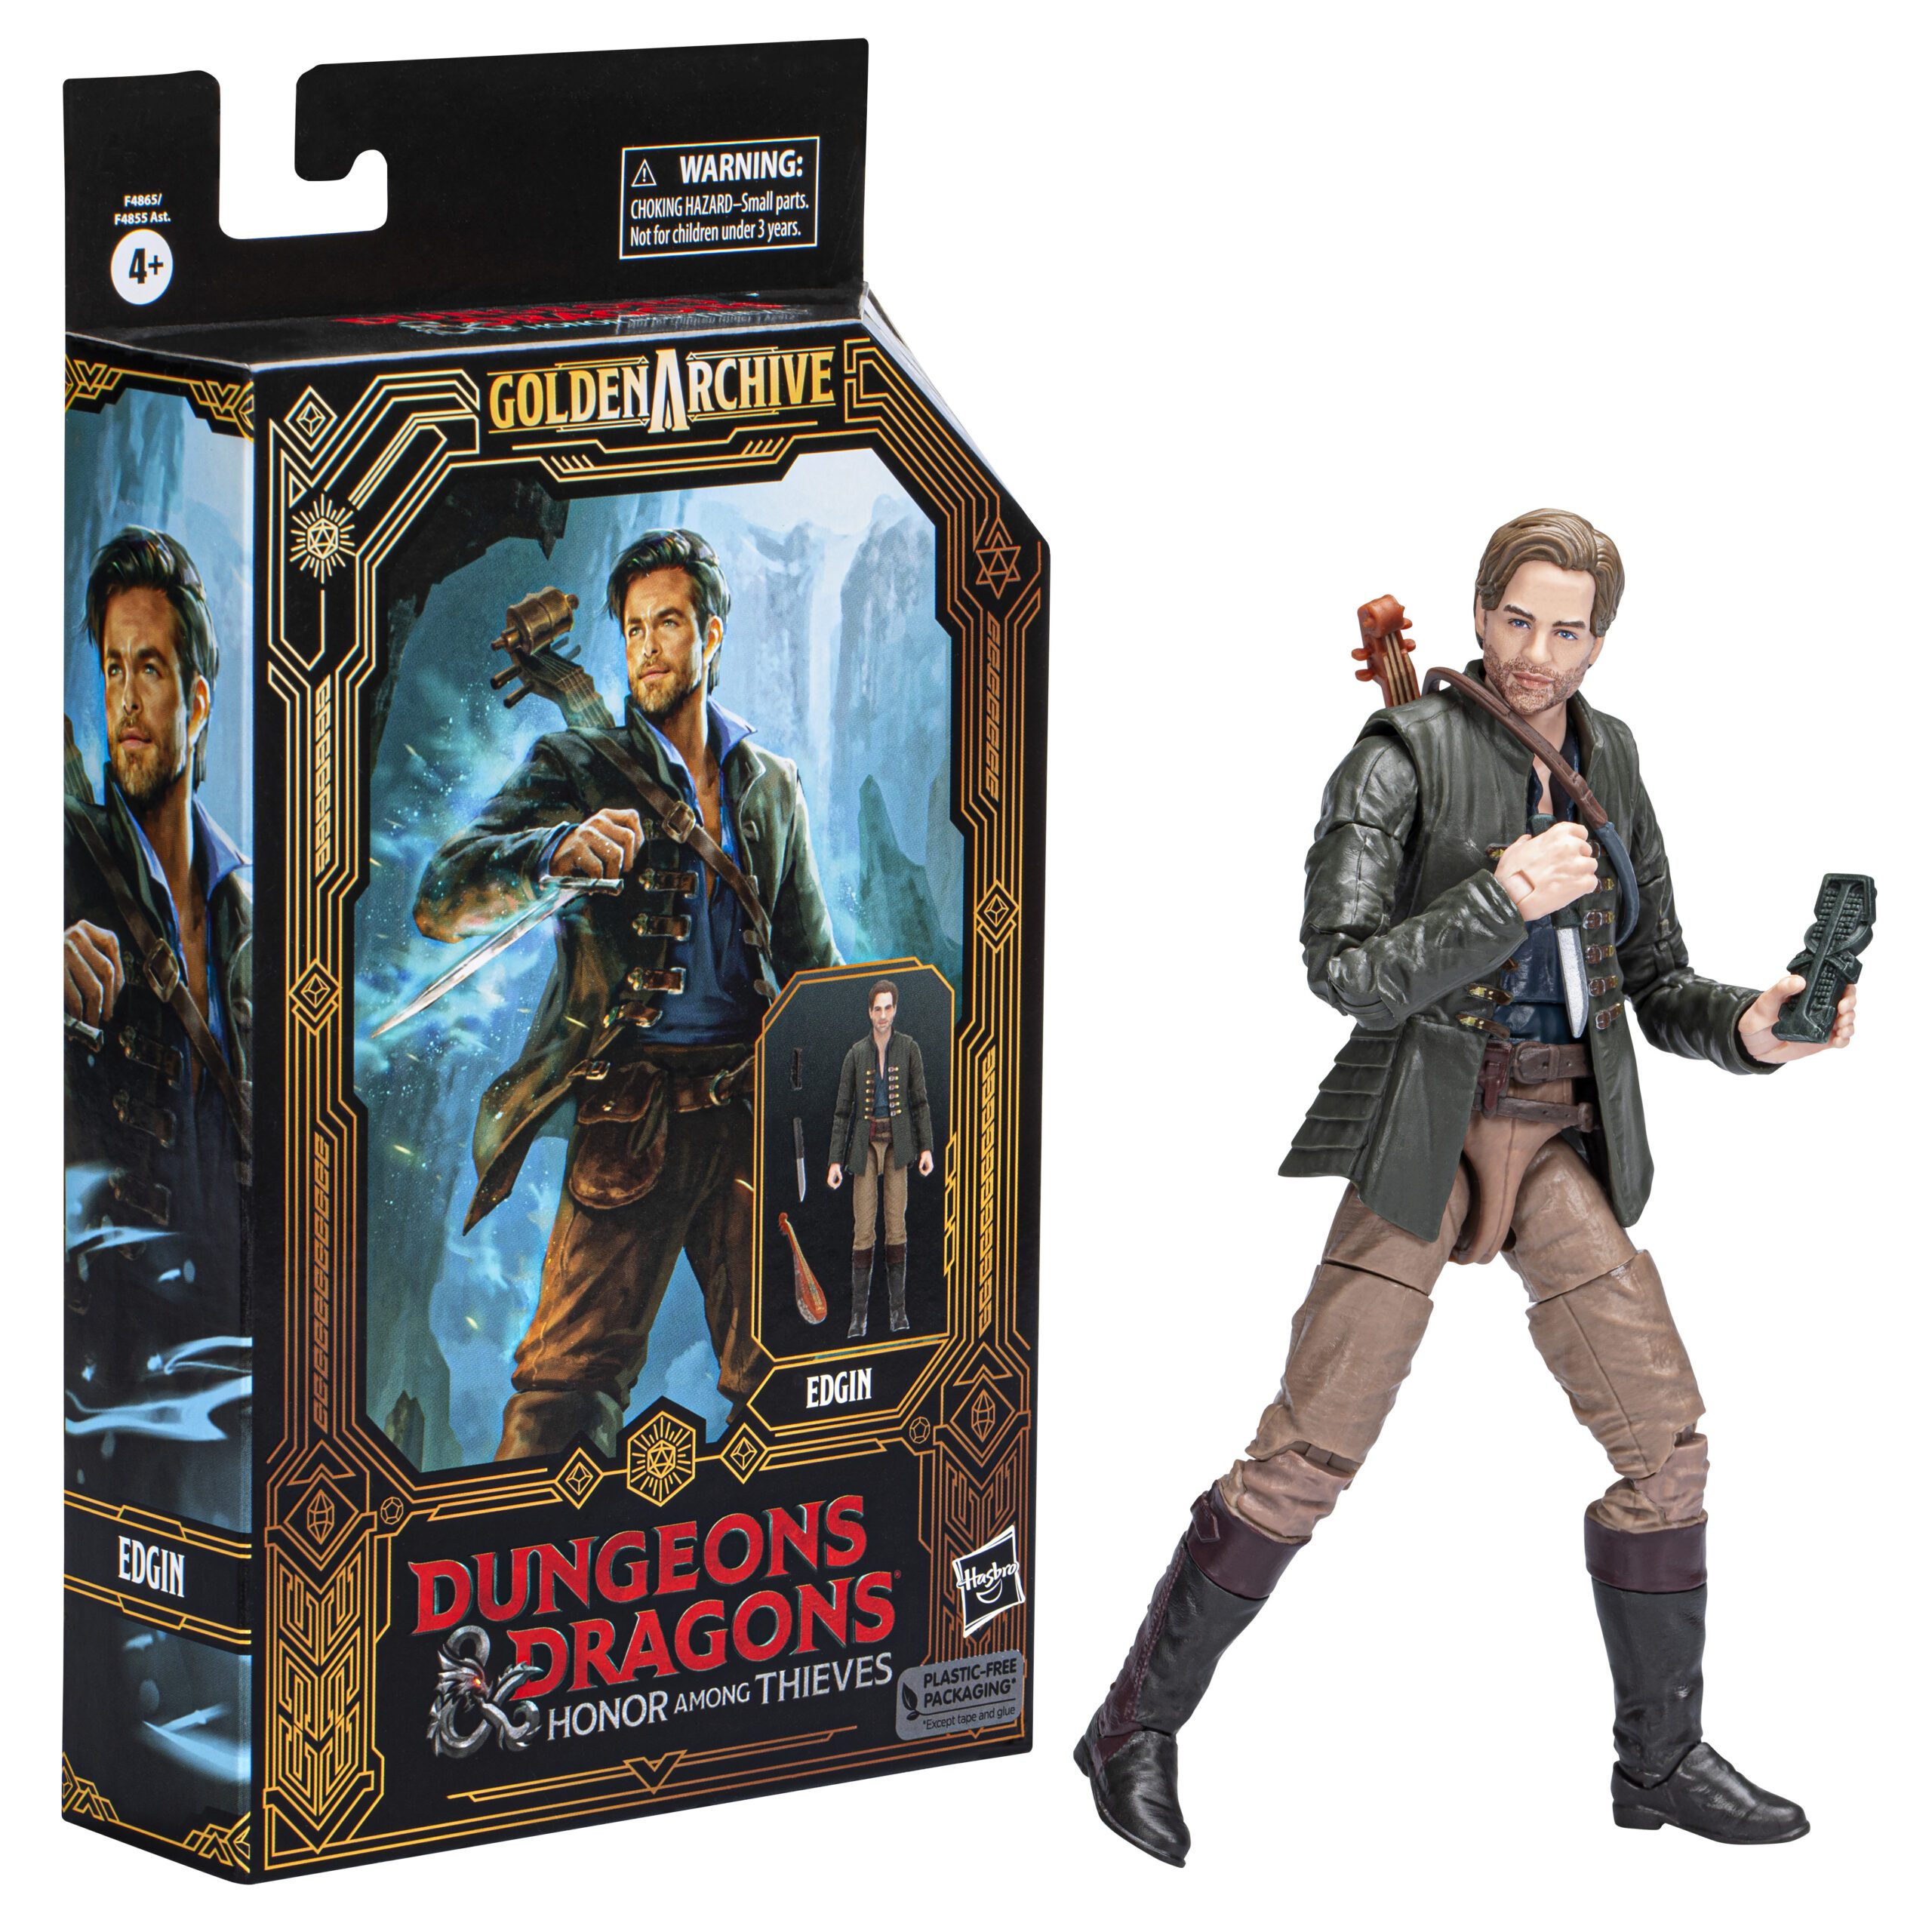 5010994192556-PN-F48655X0-Cod.-Articulo-MGS0000015336-Figura-hasbro-dungeons-dragons-honor-among-thieves-edgin-3